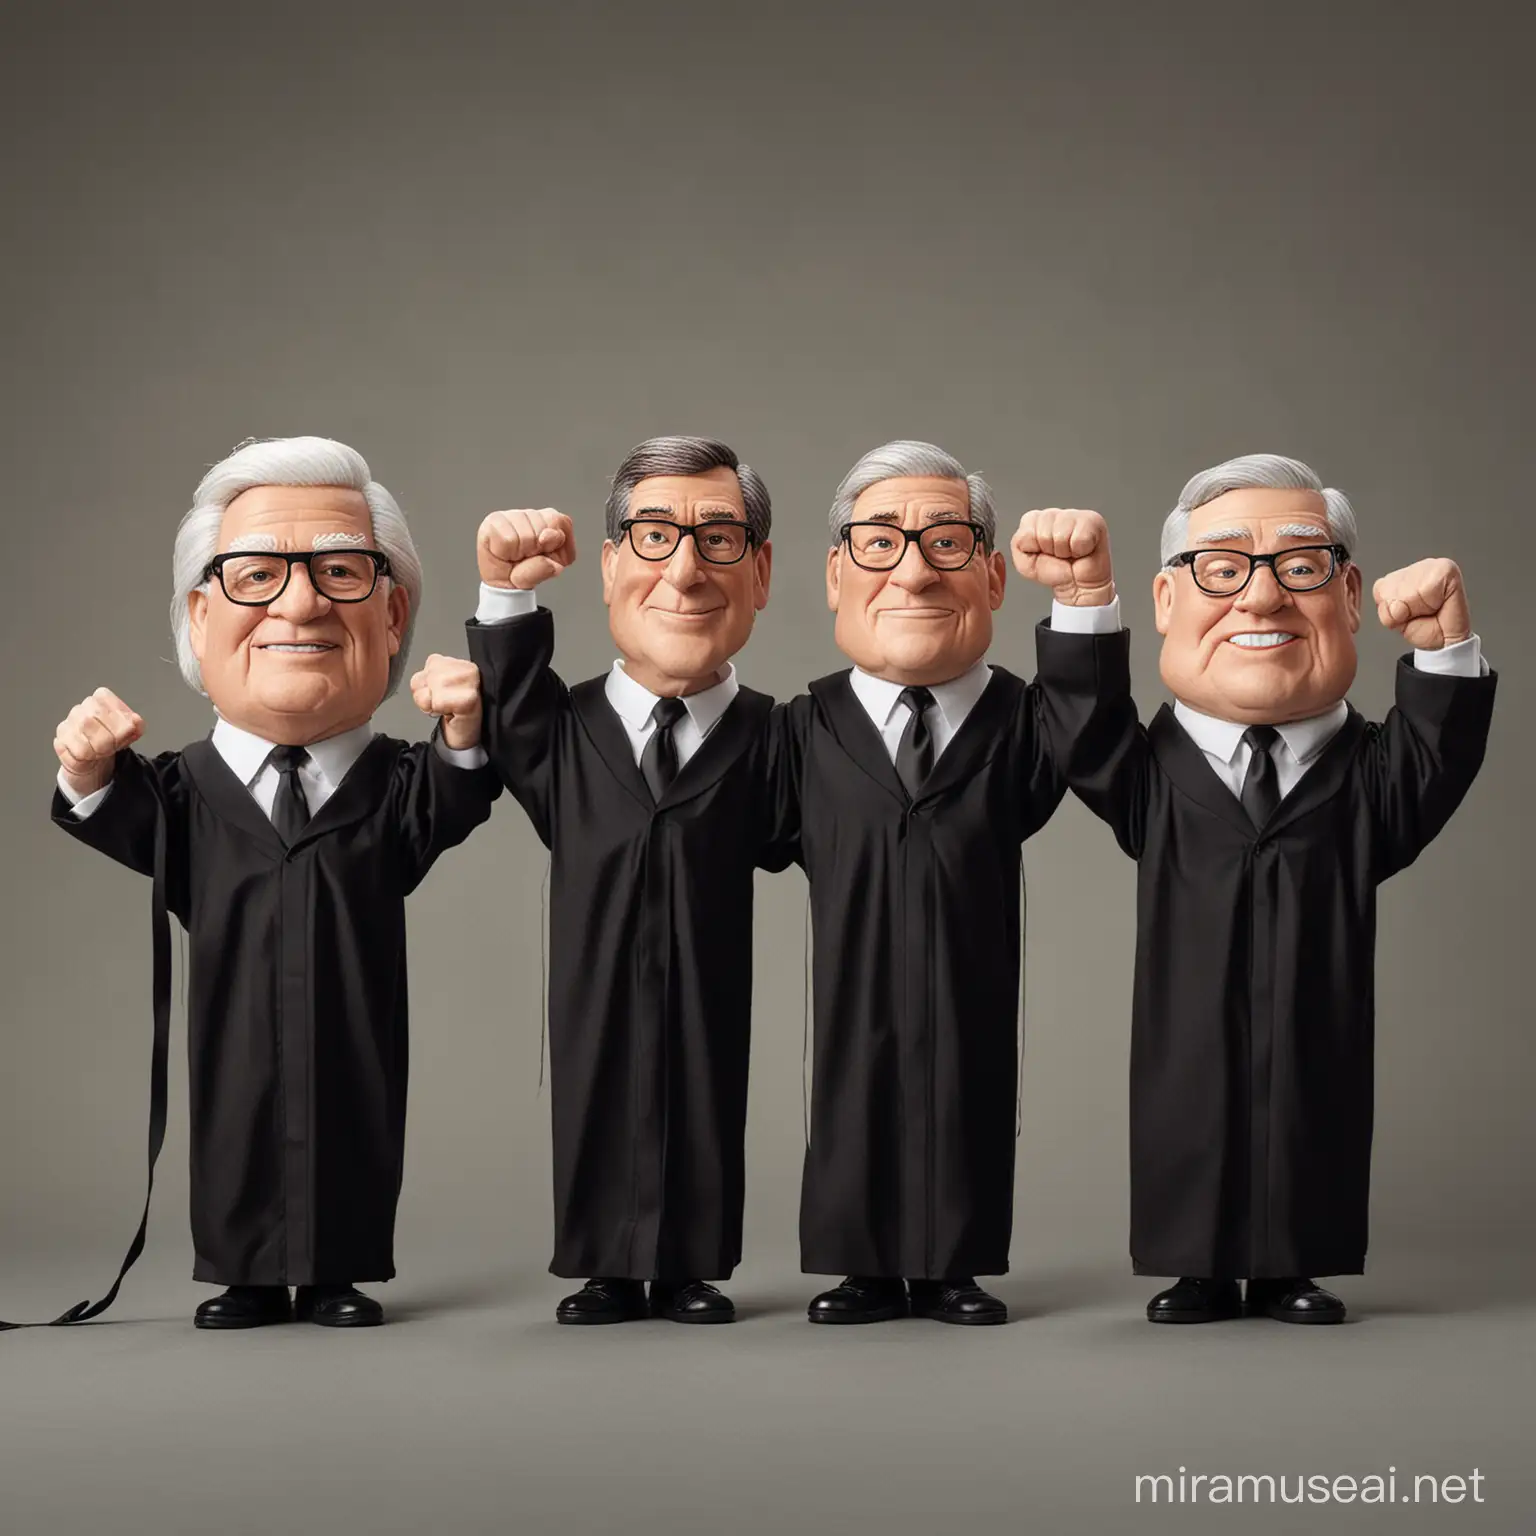 Supreme Court Justices Puppets Flexing Biceps